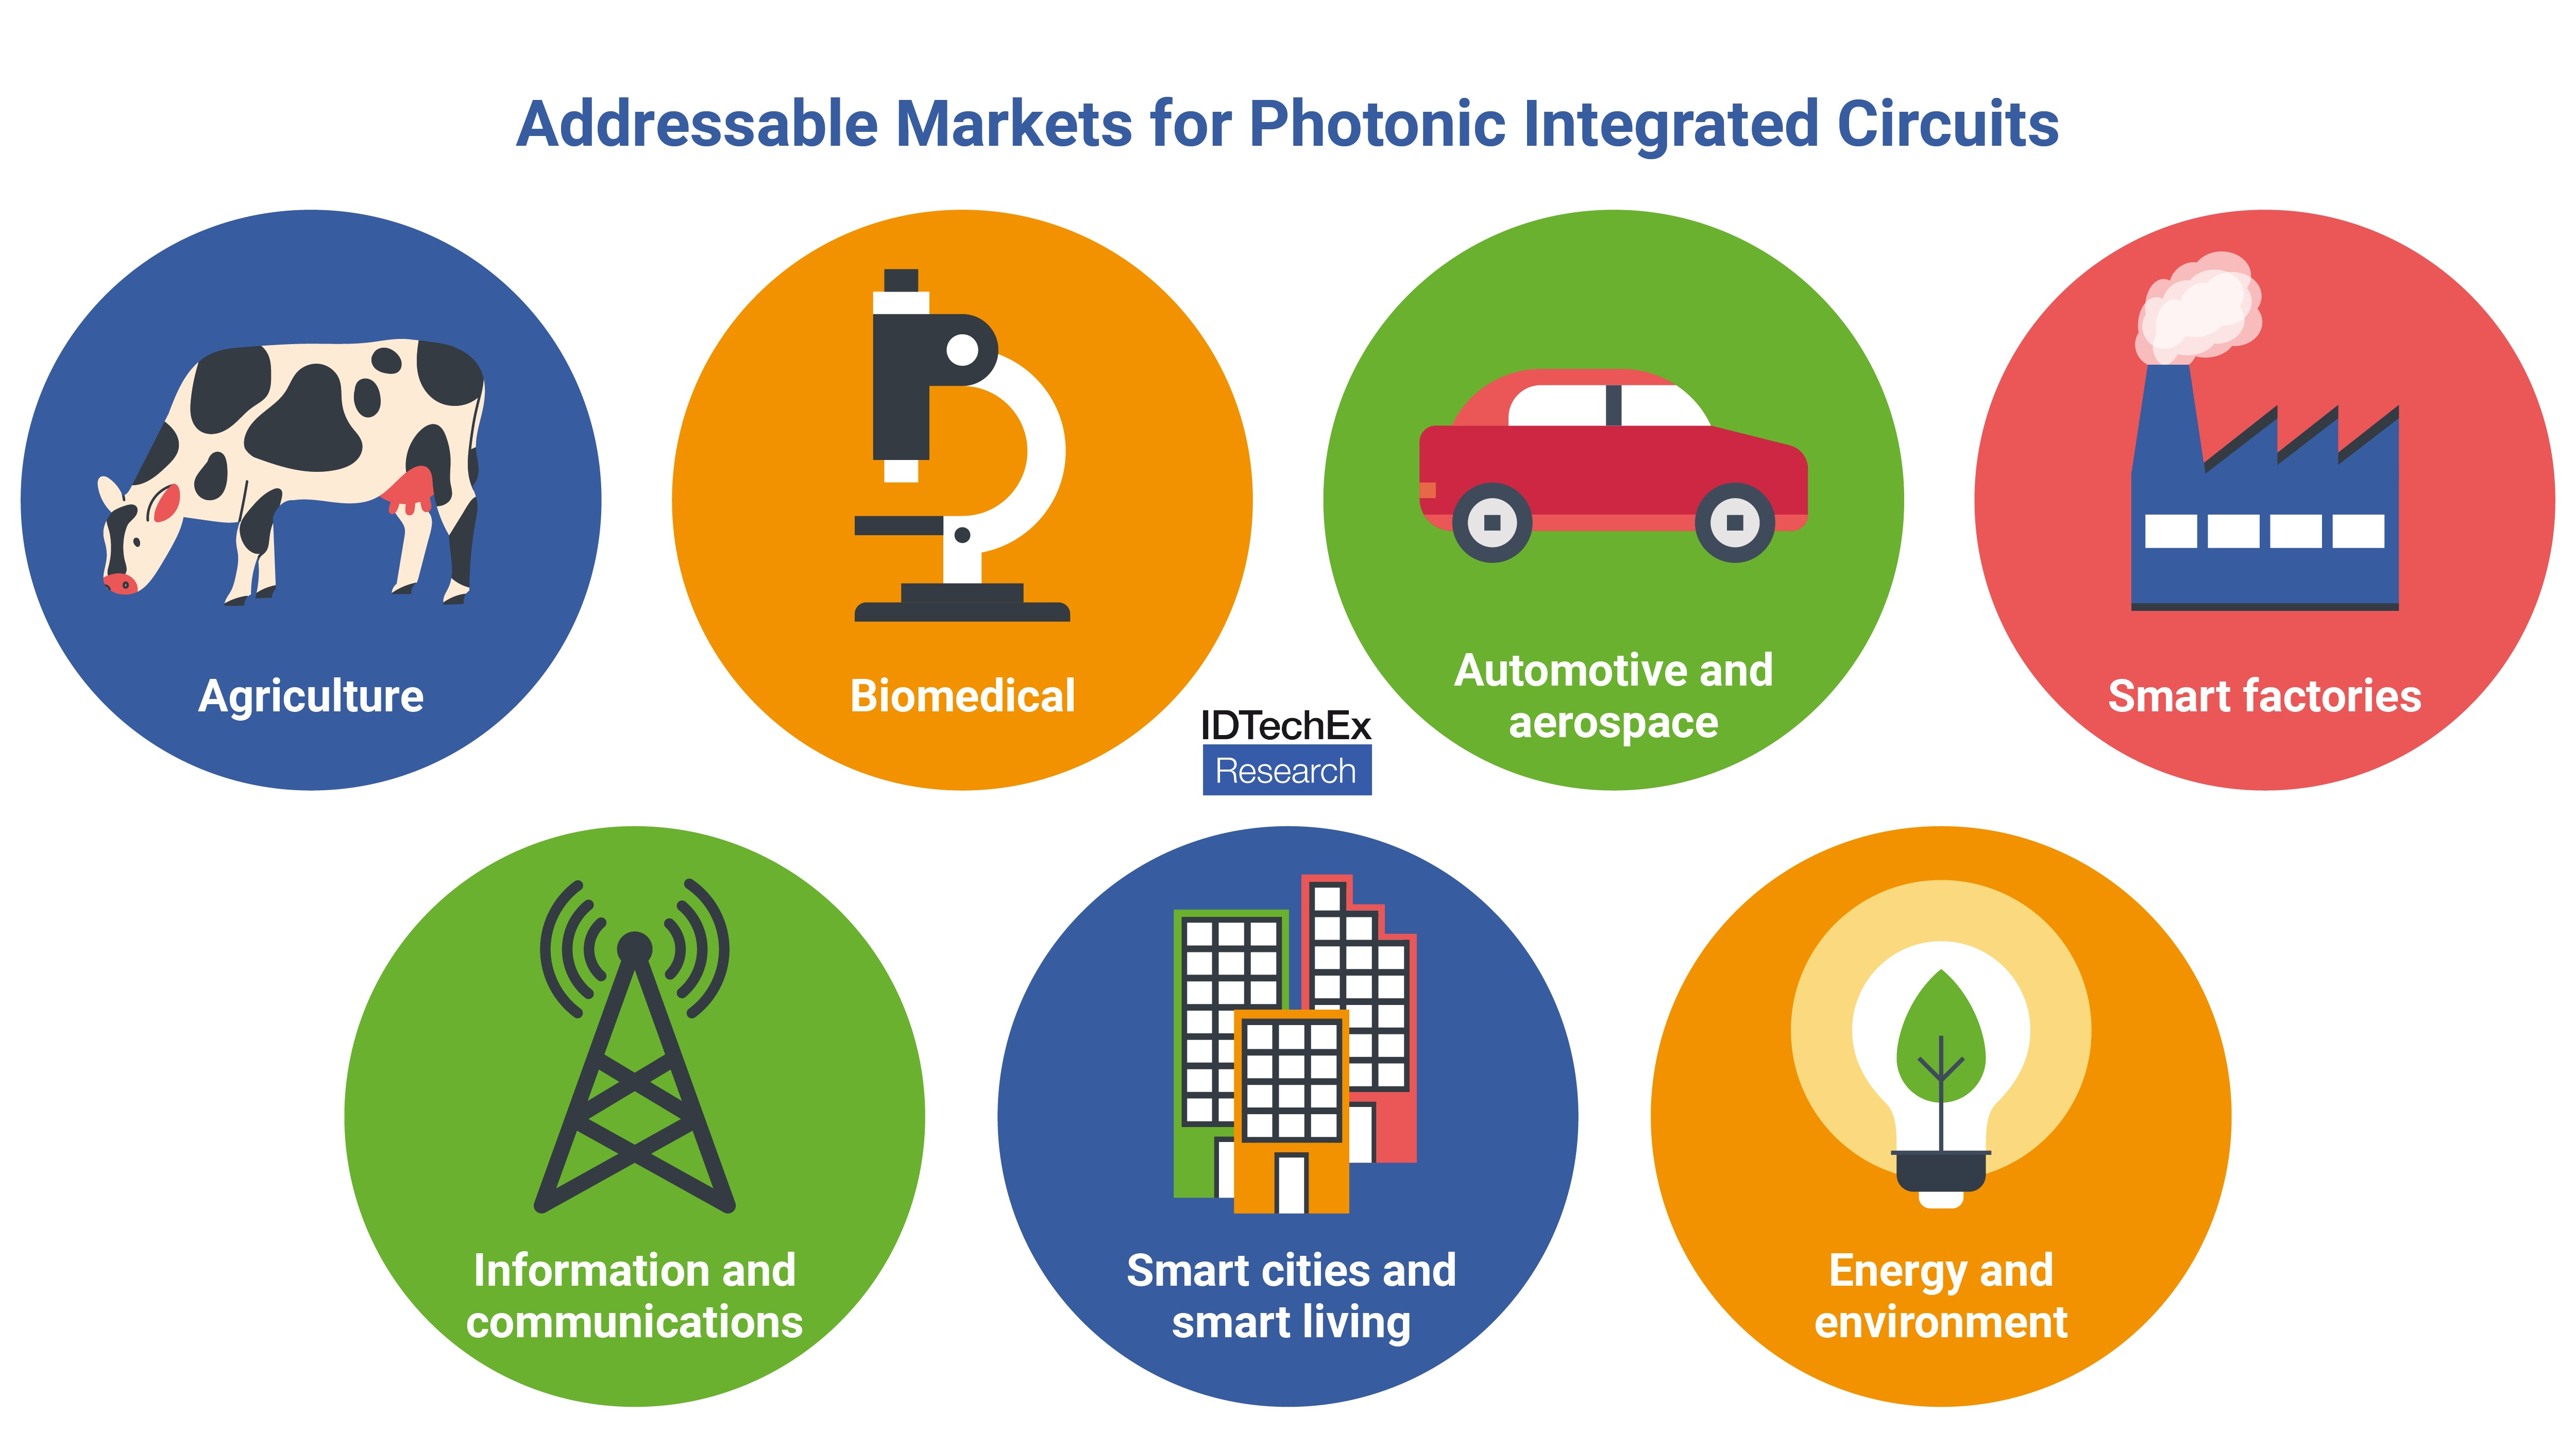 The likelihood of PIC adoption into each of the addressable markets shown here is examined by IDTechEx in their report, “Semiconductor Photonic Integrated Circuits 2023-2033”. Source: IDTechEx